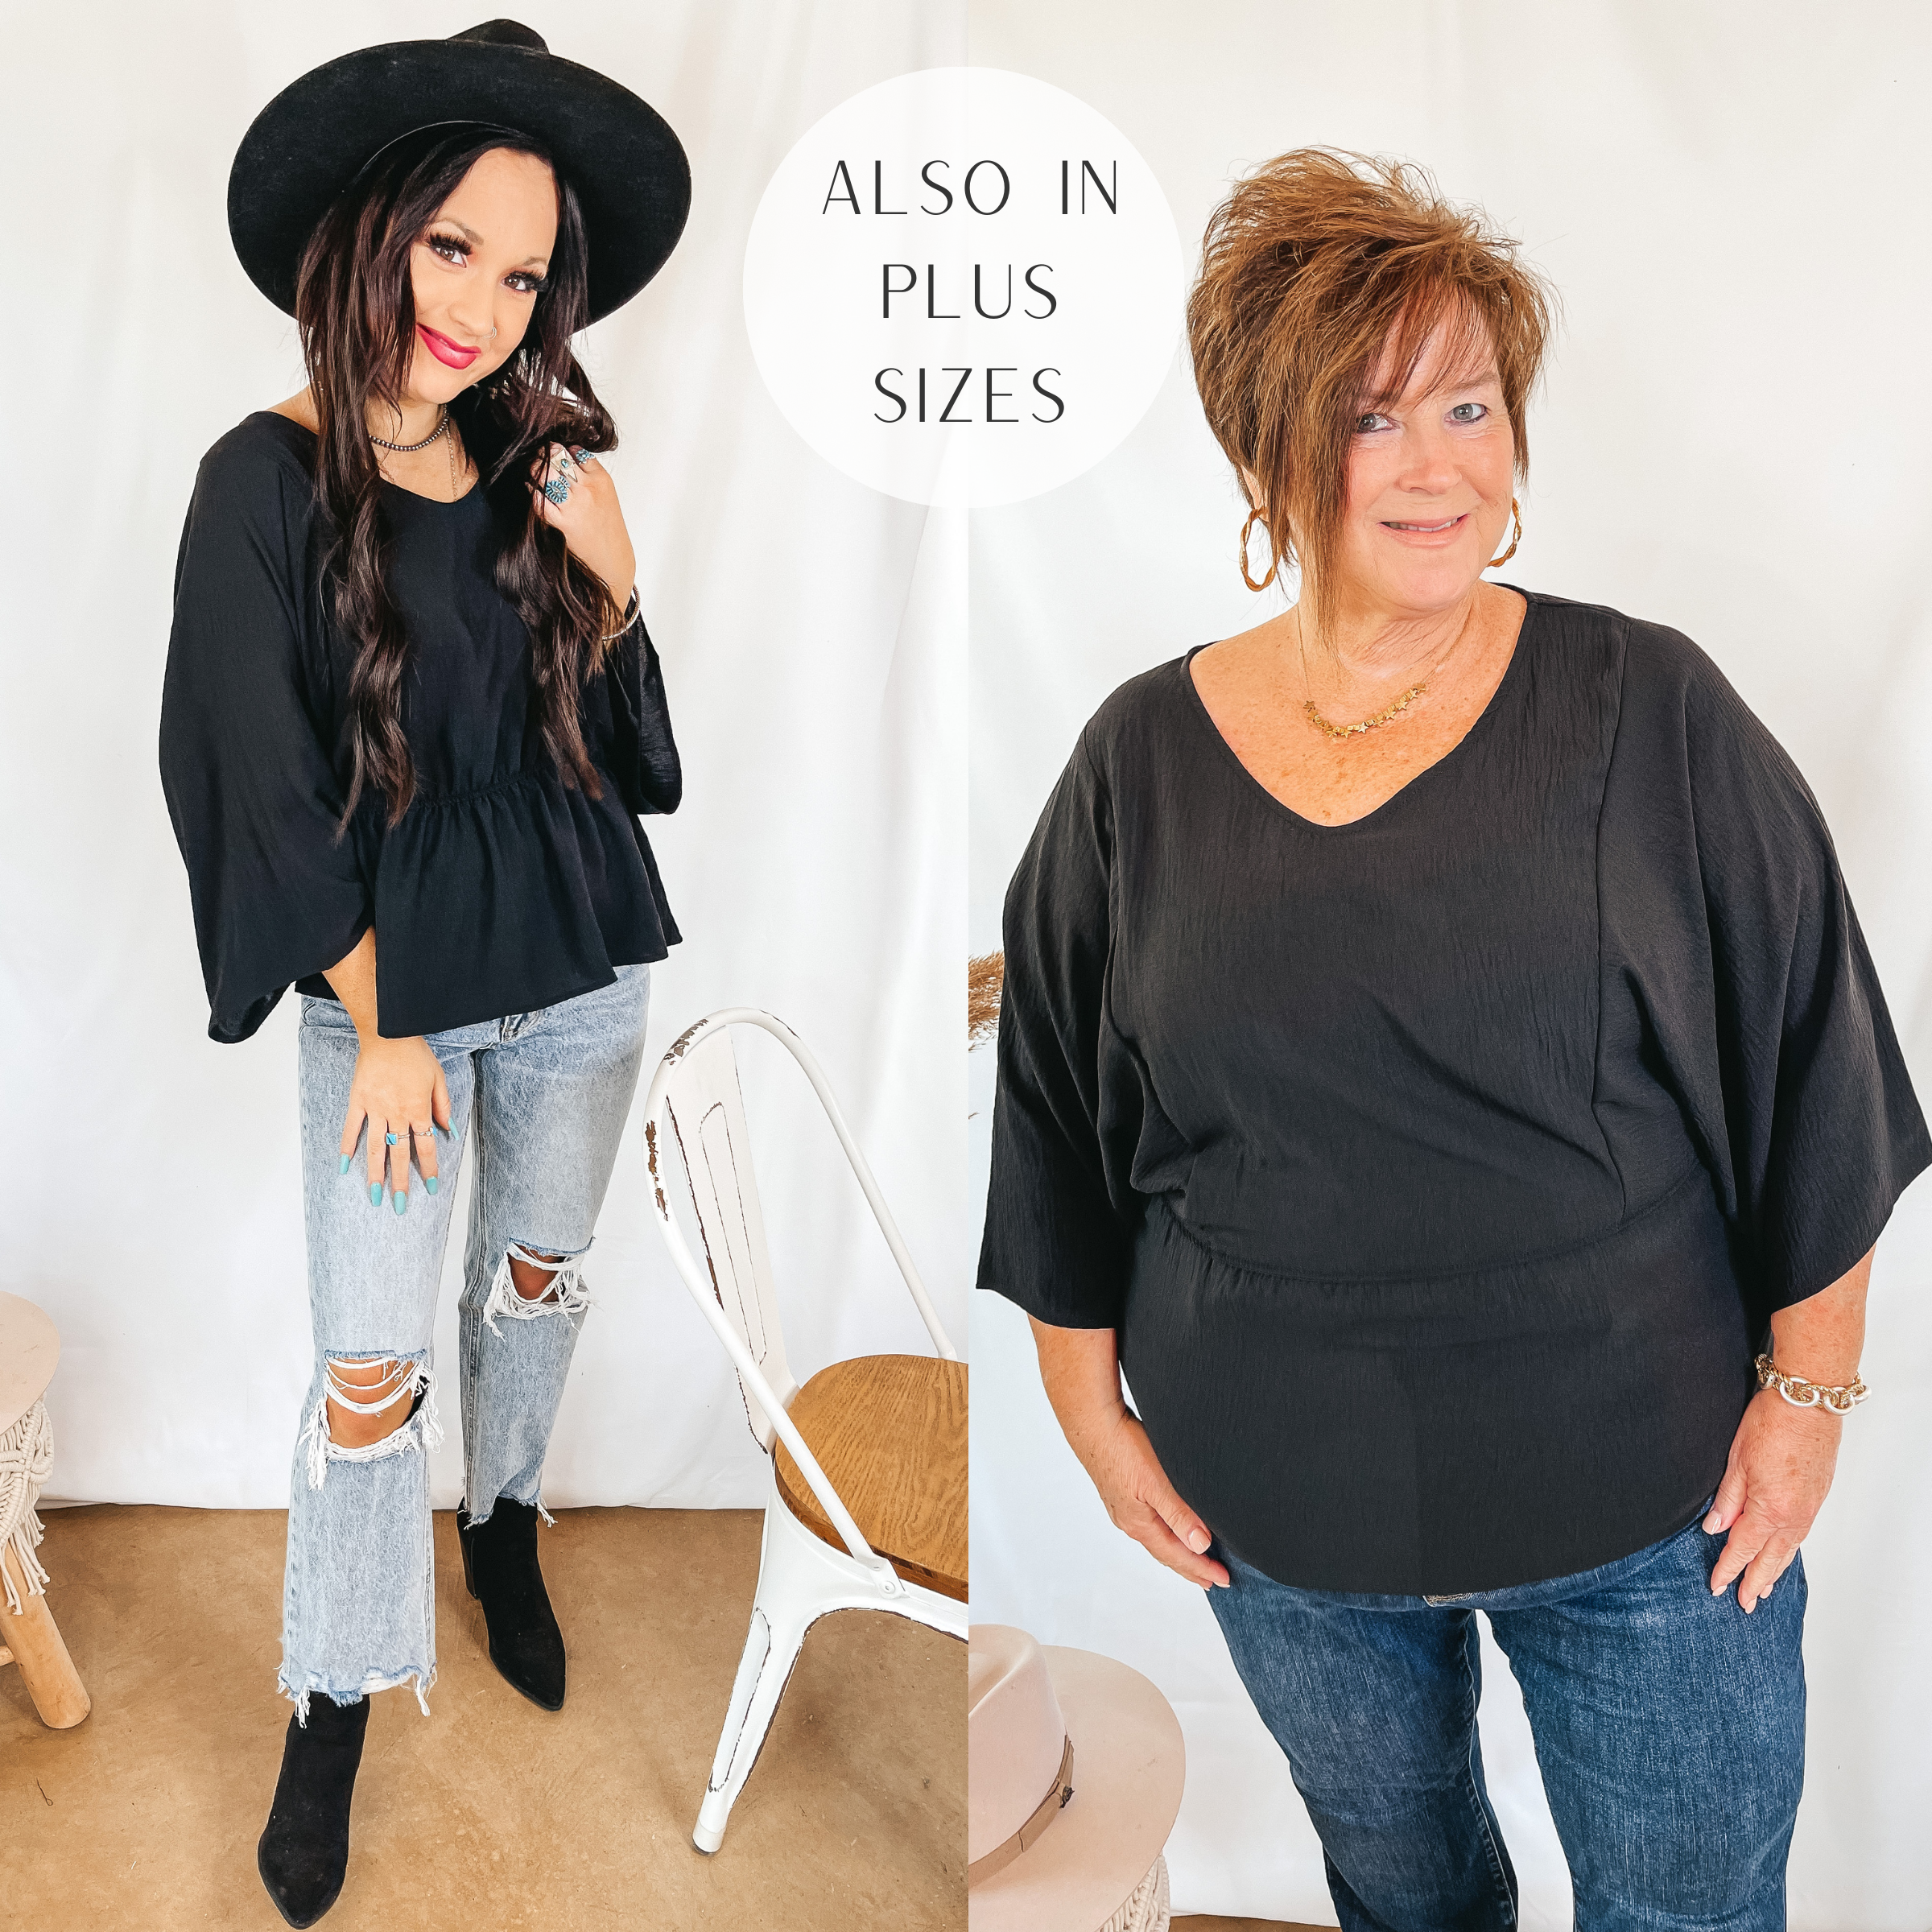 Models are wearing a flowy drop sleeve peplum top. Size small model has it paired with light wash jeans, black booties, and a black hat. Plus size model has it paired with dark wash jeans and gold jewelry.